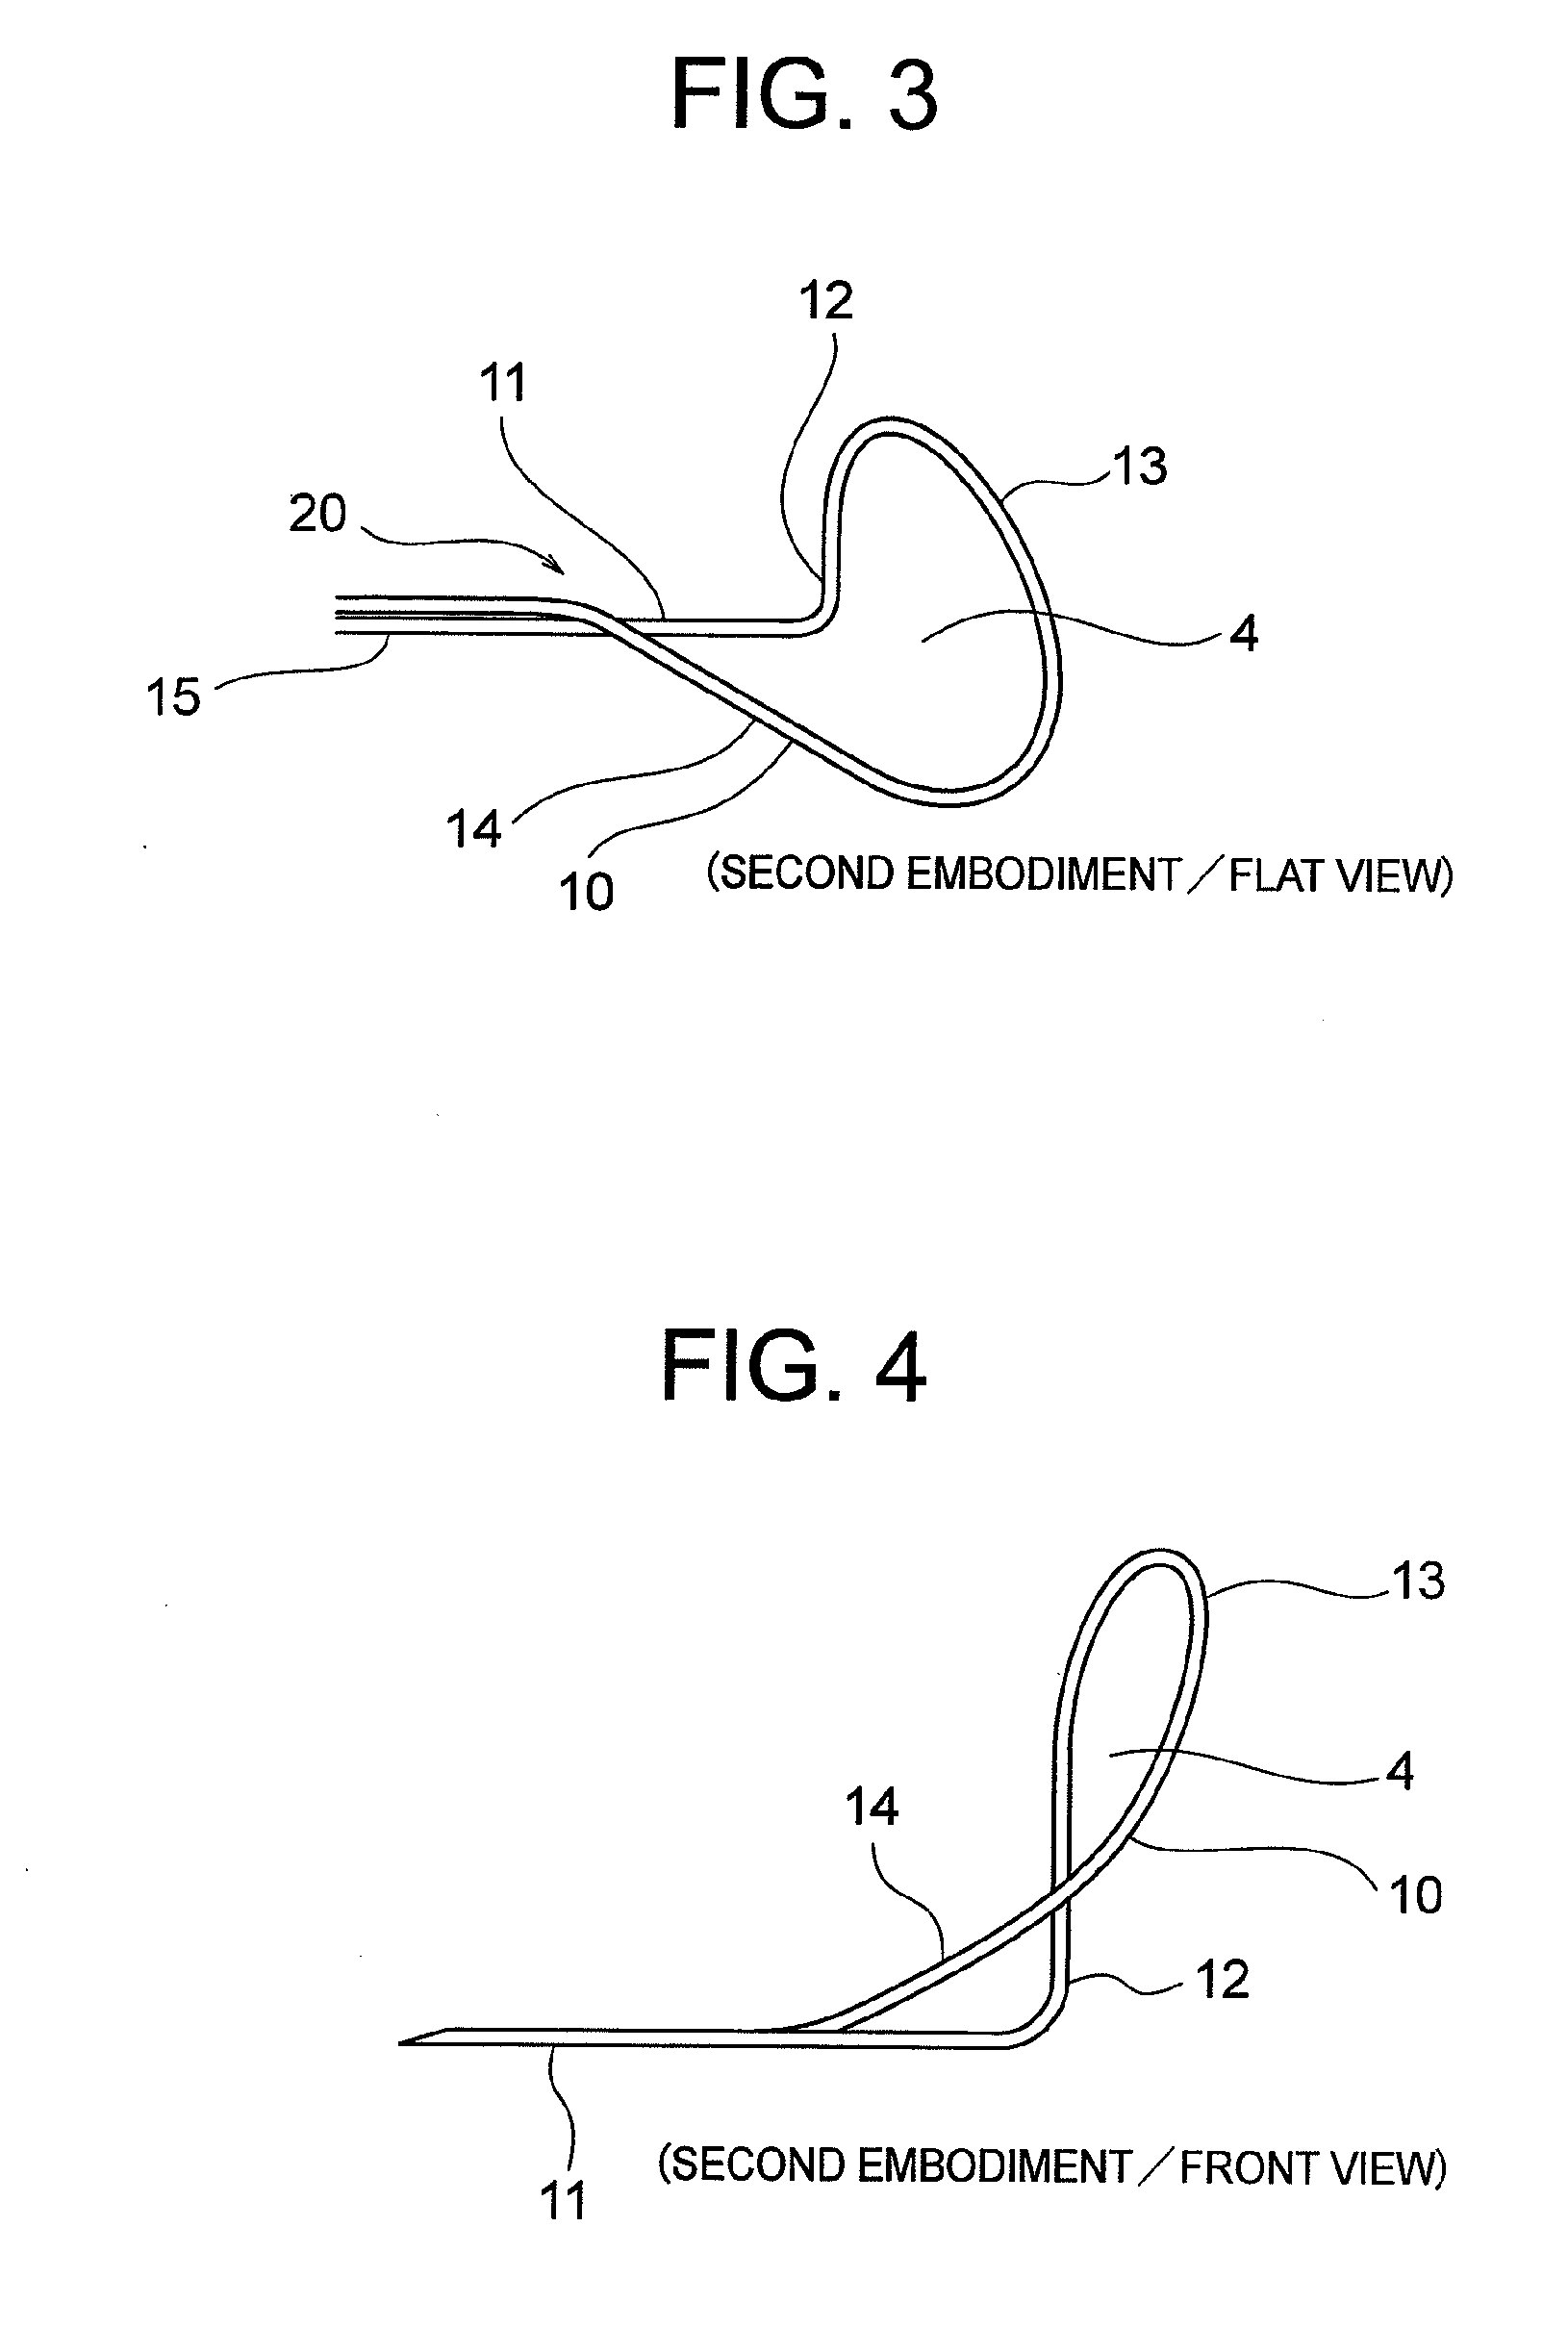 Asymmetric one-legged wire guide for fishing rod